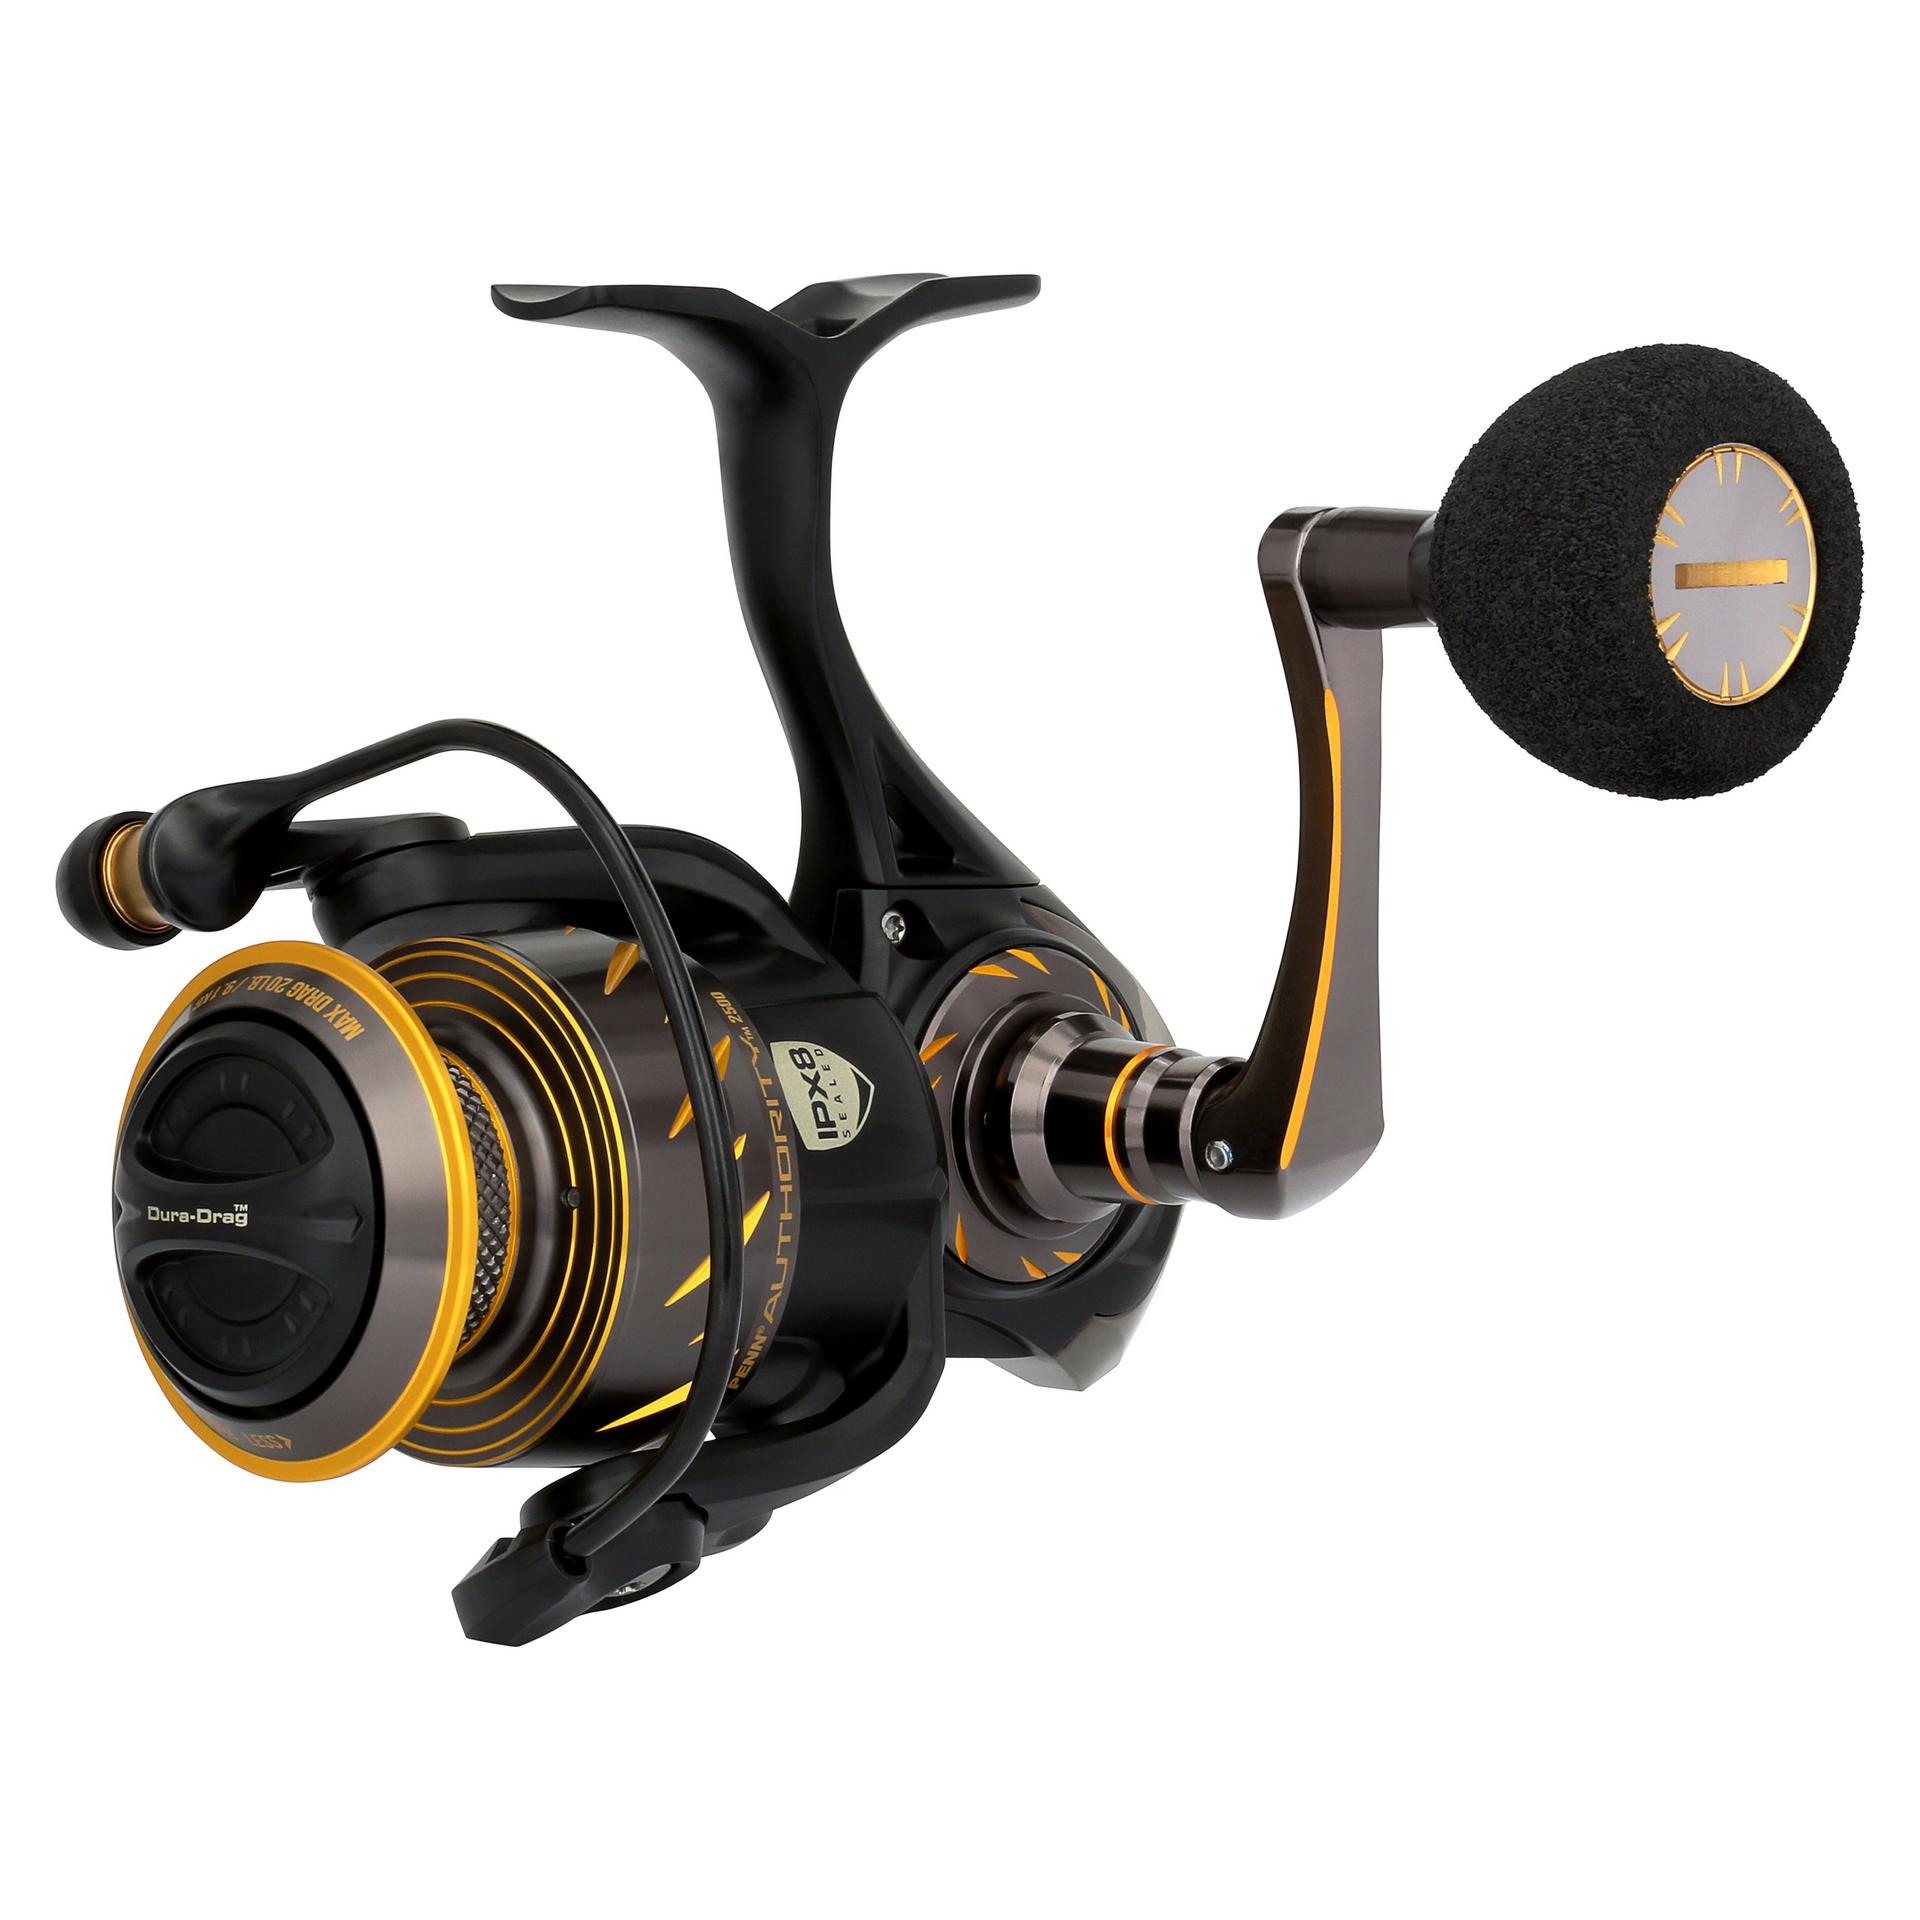 Penn Authority Spinning Reels are trickling in. Head over to jandh